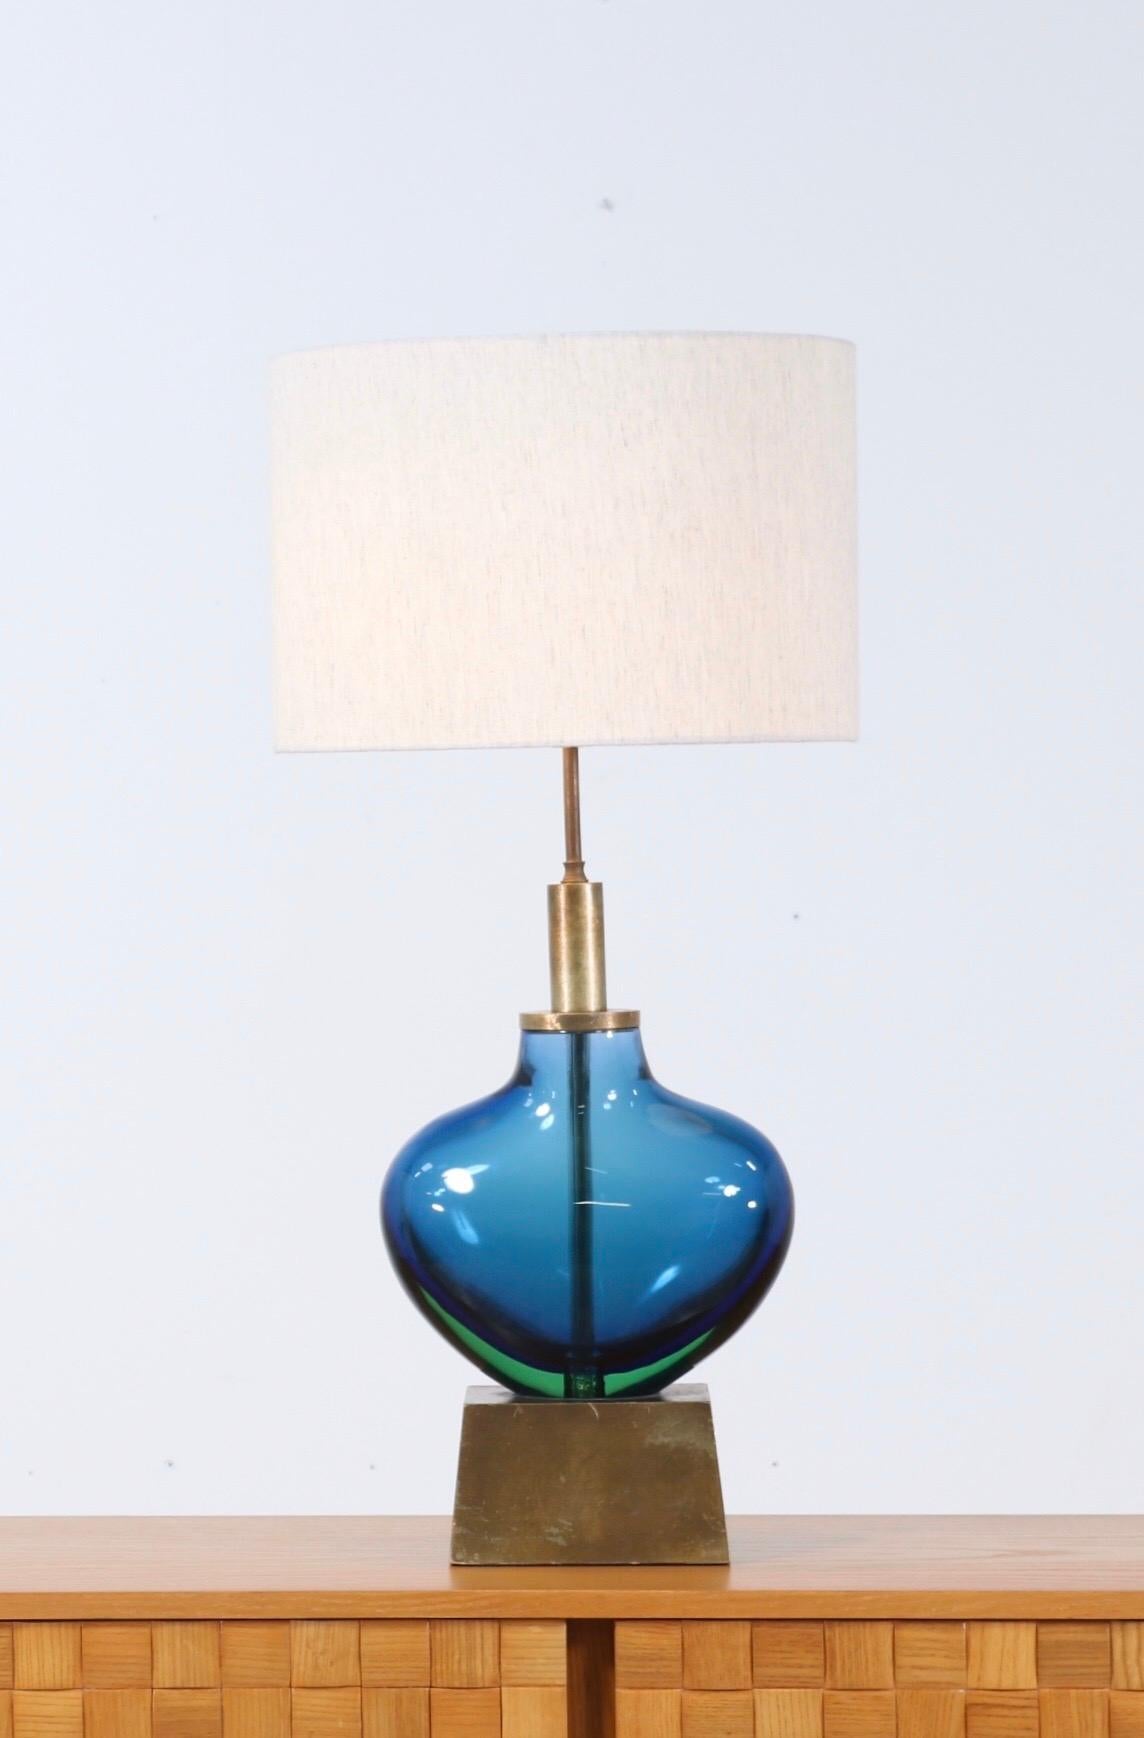 Fantastic, 1950s Italian Murano glass lamp designed by Flavio Poli for Seguso, Italy.

The lamp consists of a beautiful and substantial mouth-blown glass body mounted on a gilt-wood base. The design is executed using the Sommerso technique.